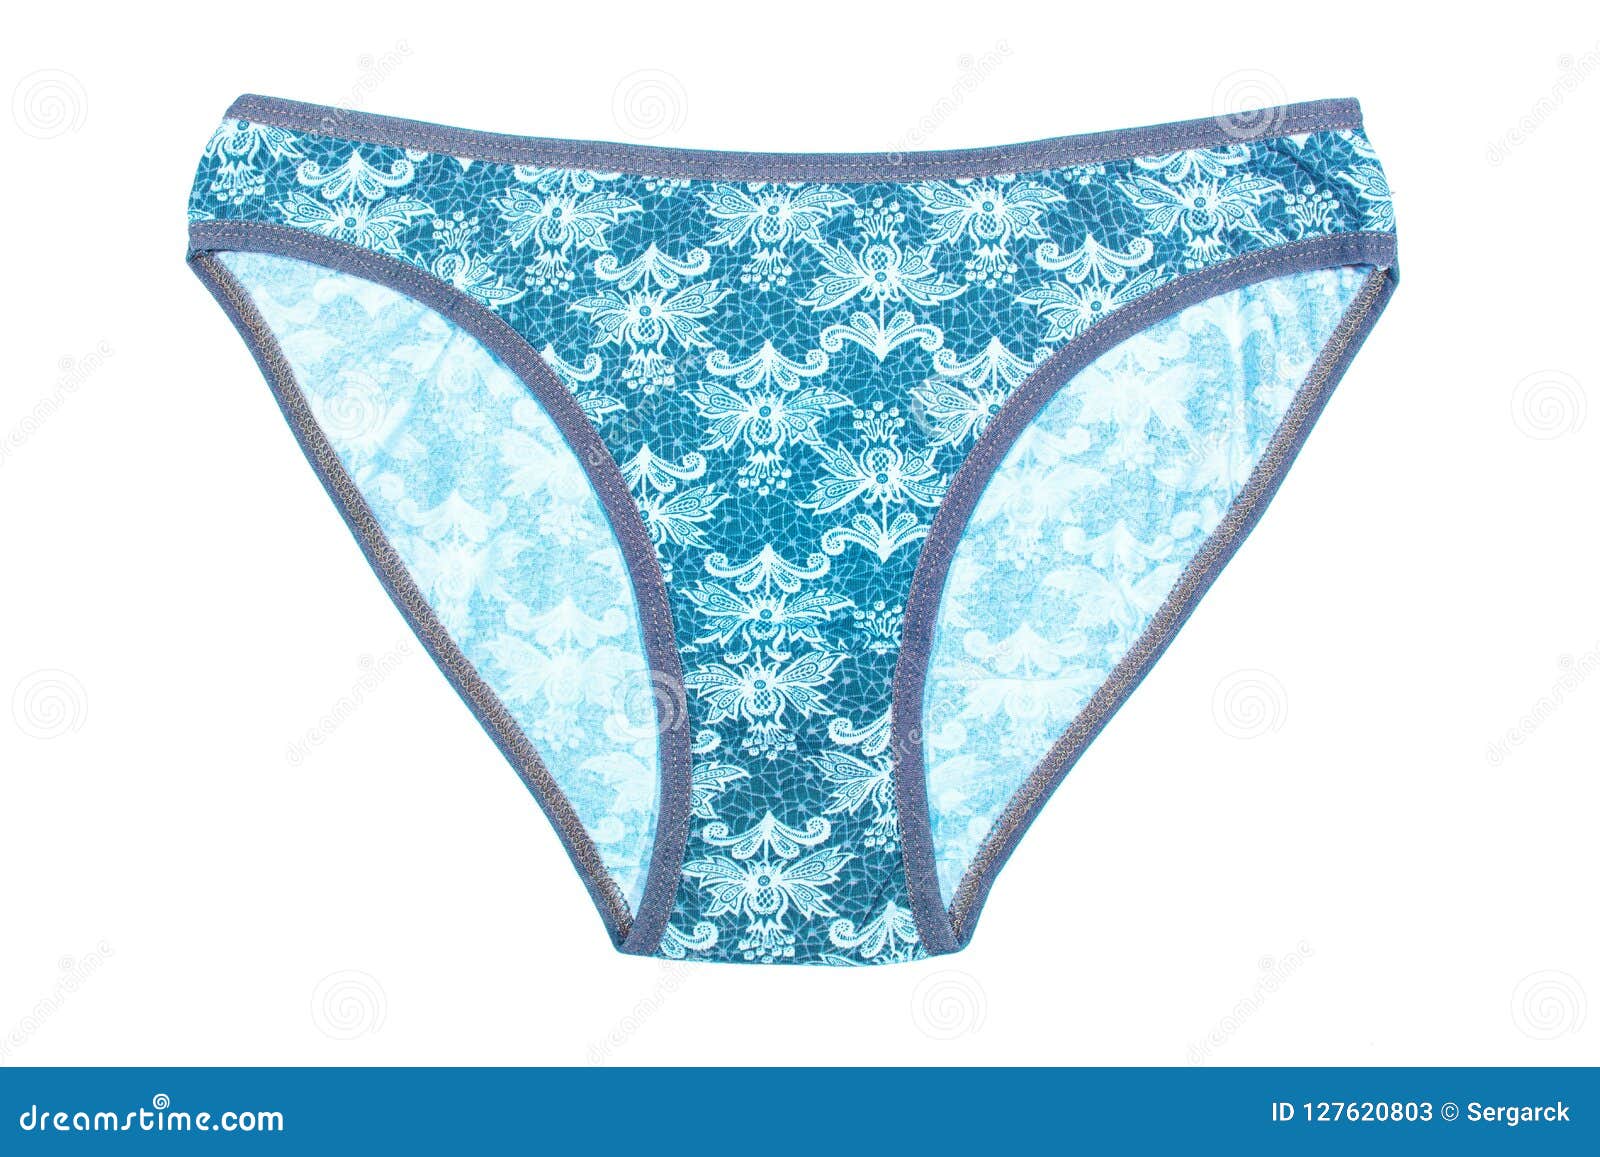 Women`s Cotton Panties Flowered Isolated on White Background. Stock ...